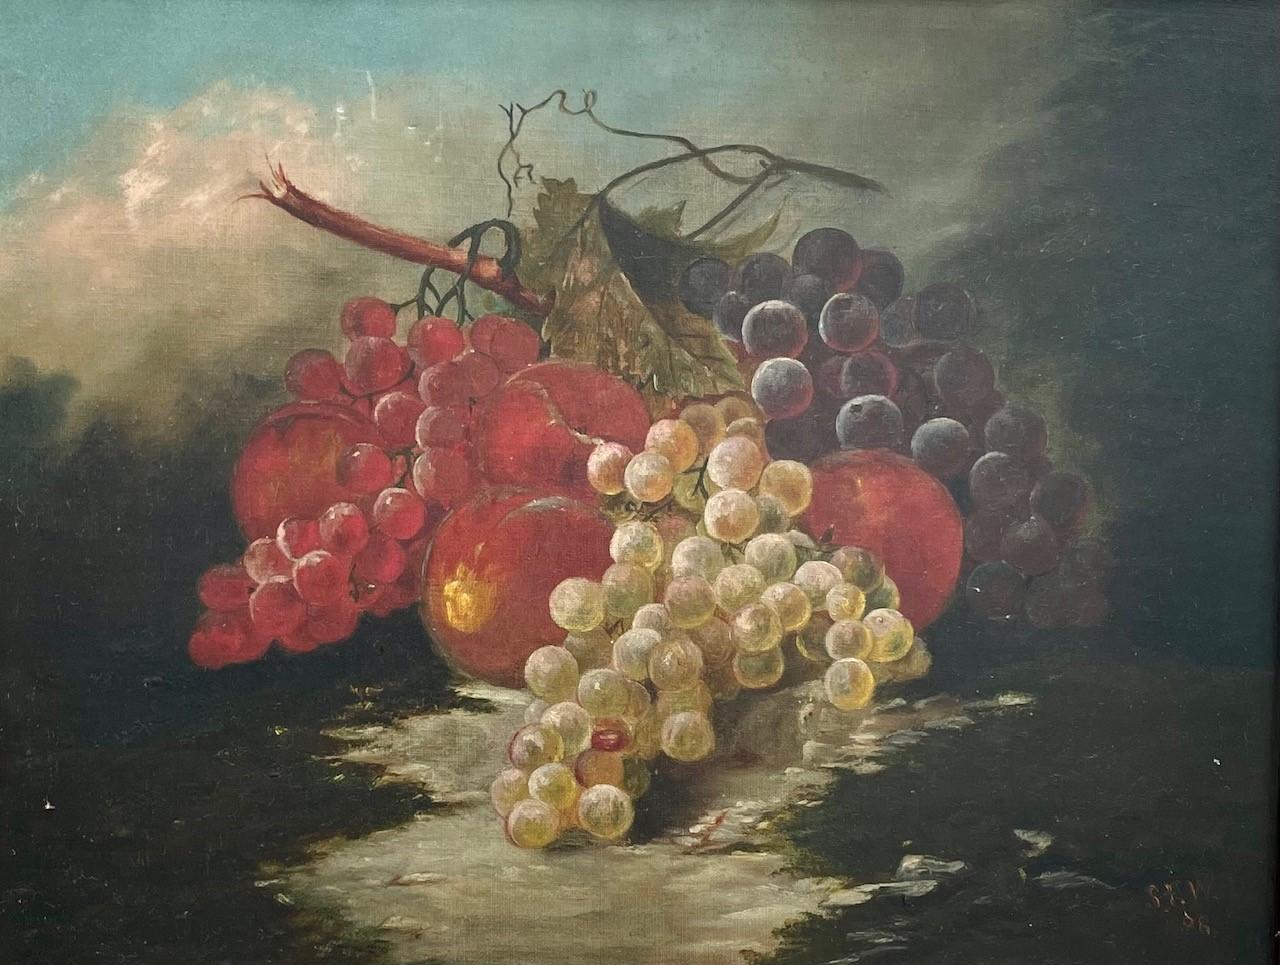 19th century American oil painting still life with fruit and grapes.

Beautiful and masterfully executed still life oil painting depicting grapes and fruit against a blue sky. This work is monogrammed and dated ‘88 (1888). It was received in the